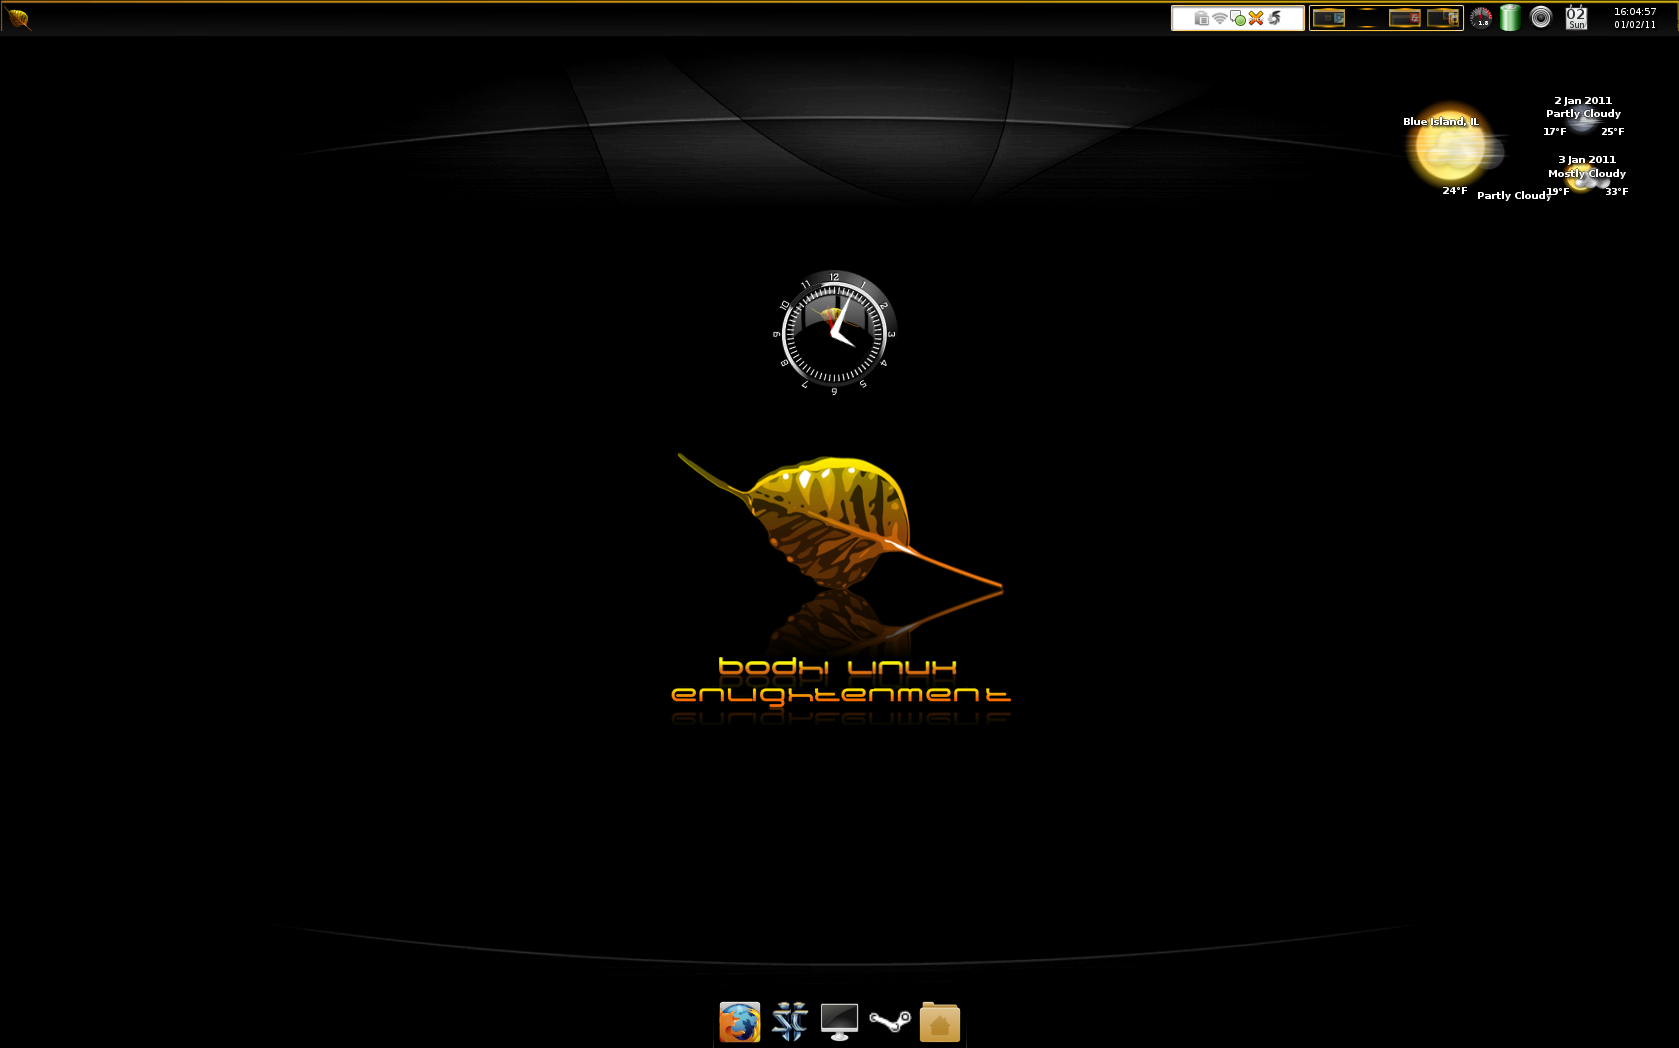 Bodhi Linux 3.0.0 RC1.png